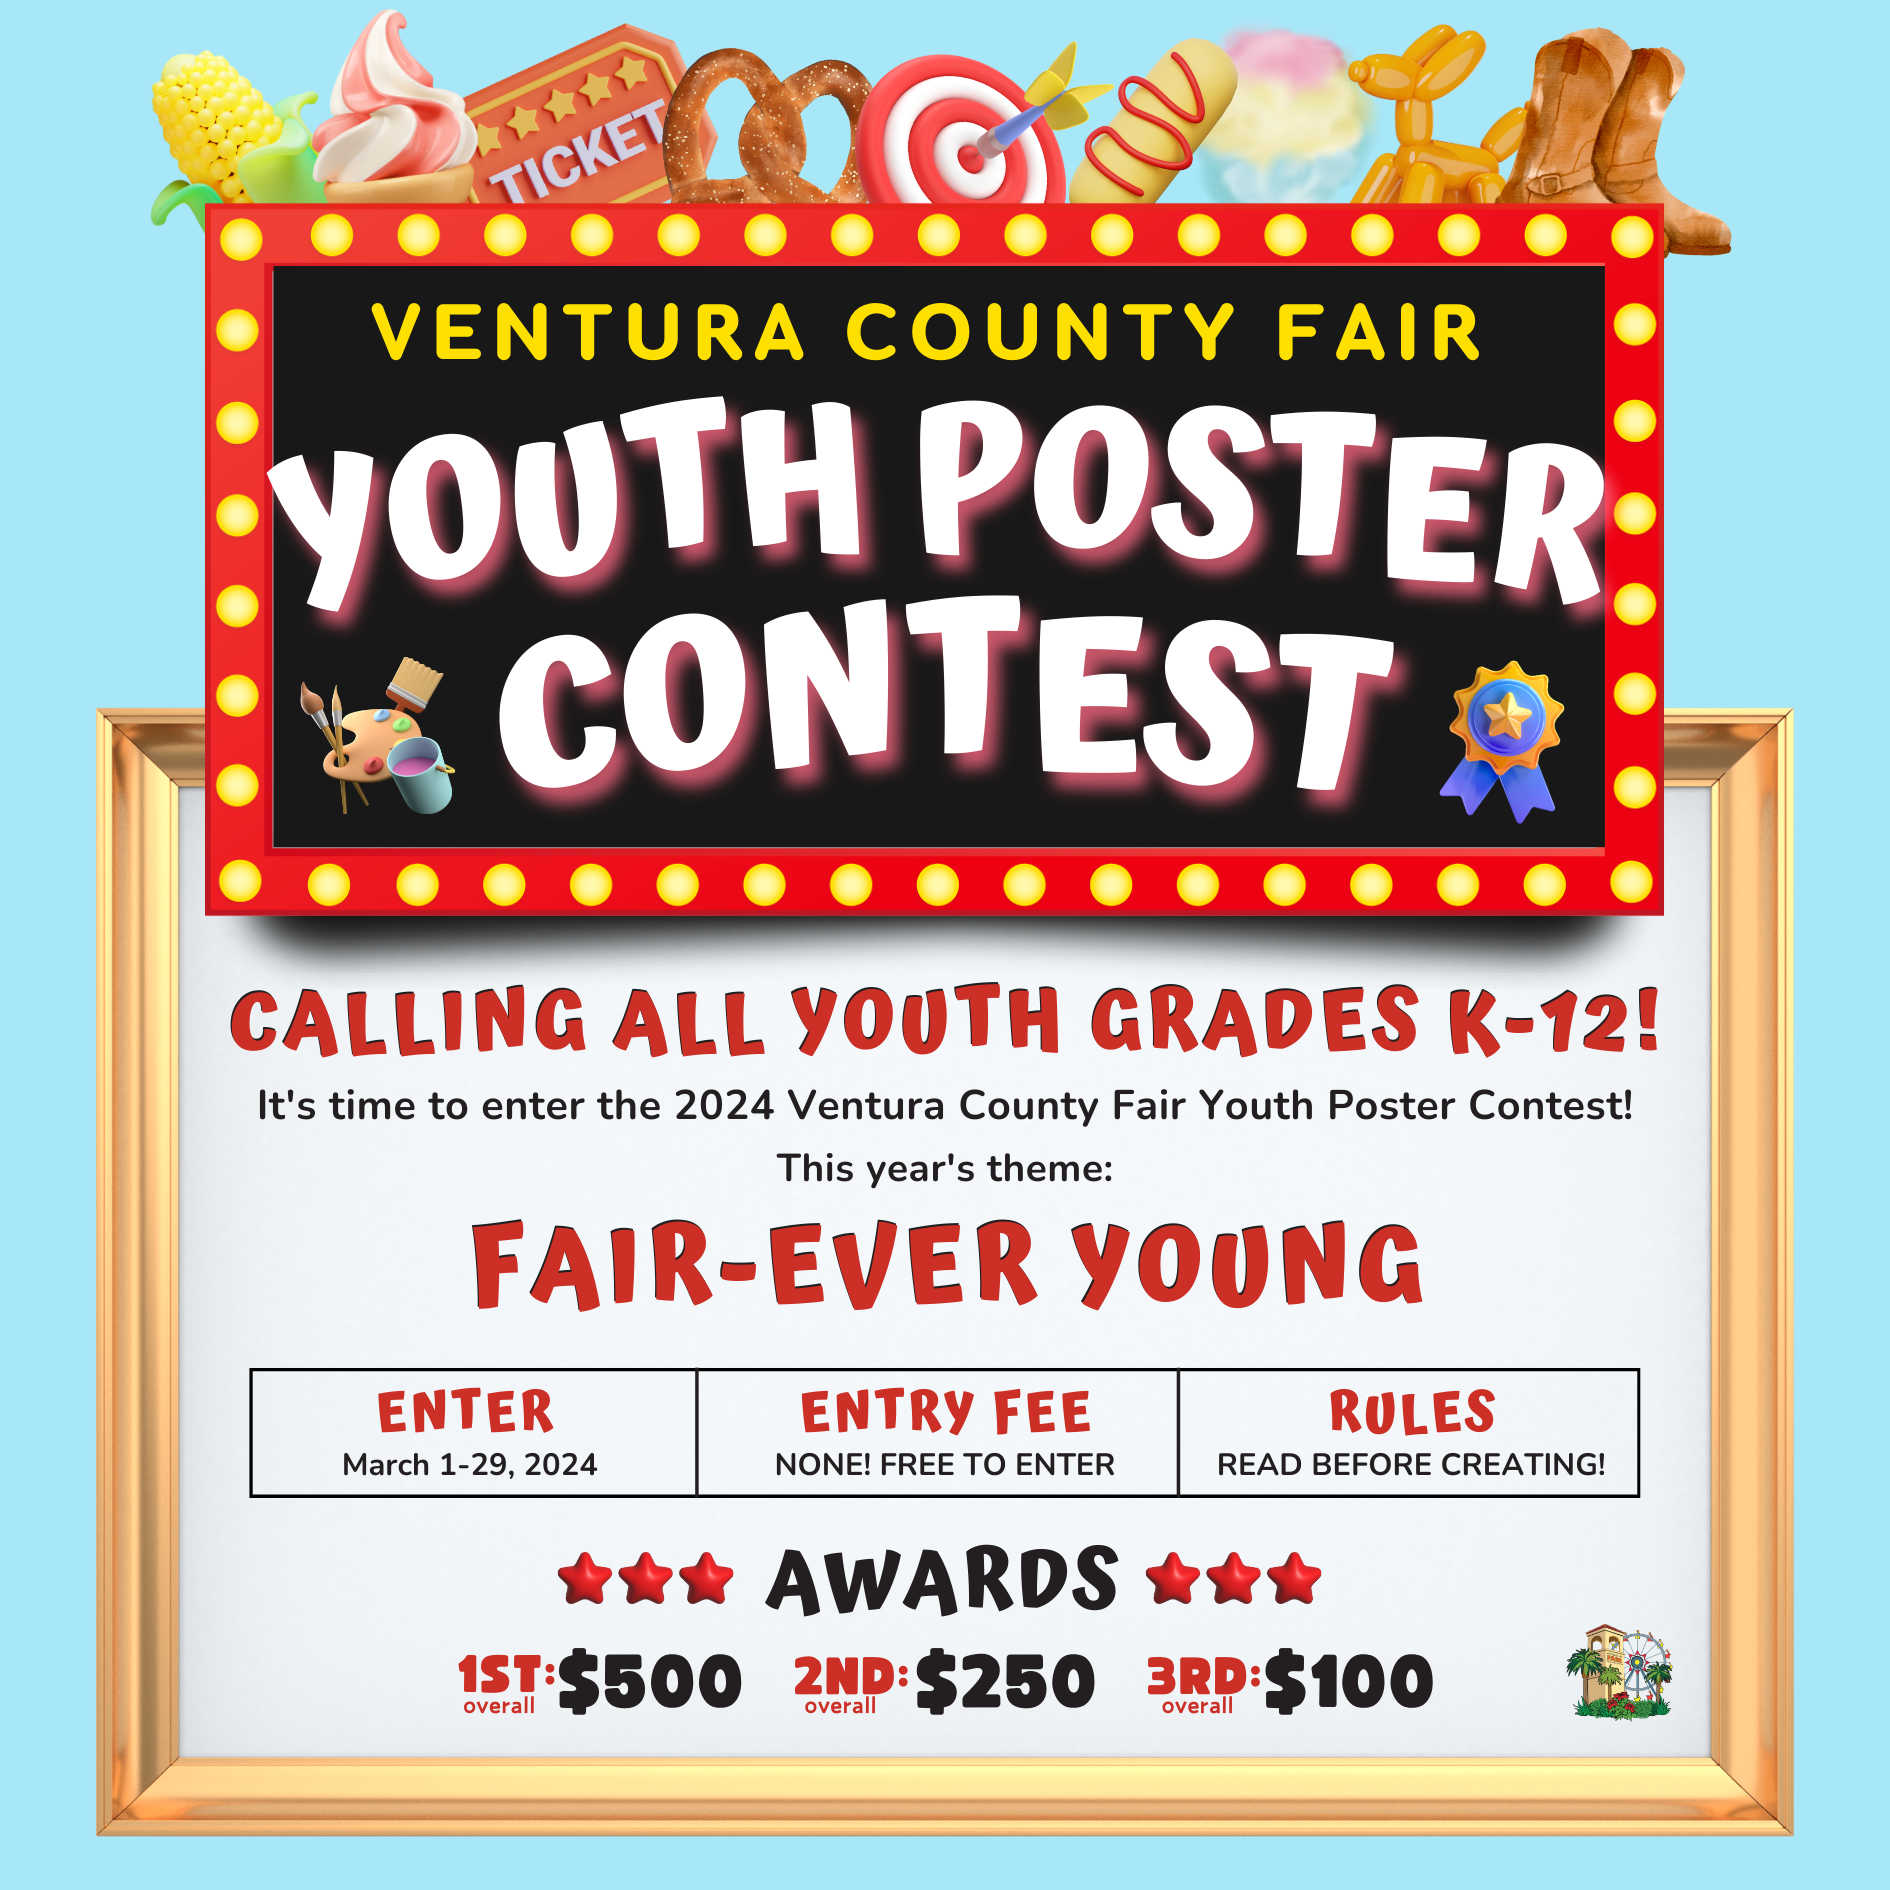 Ventura County Fair Youth Poster Contest